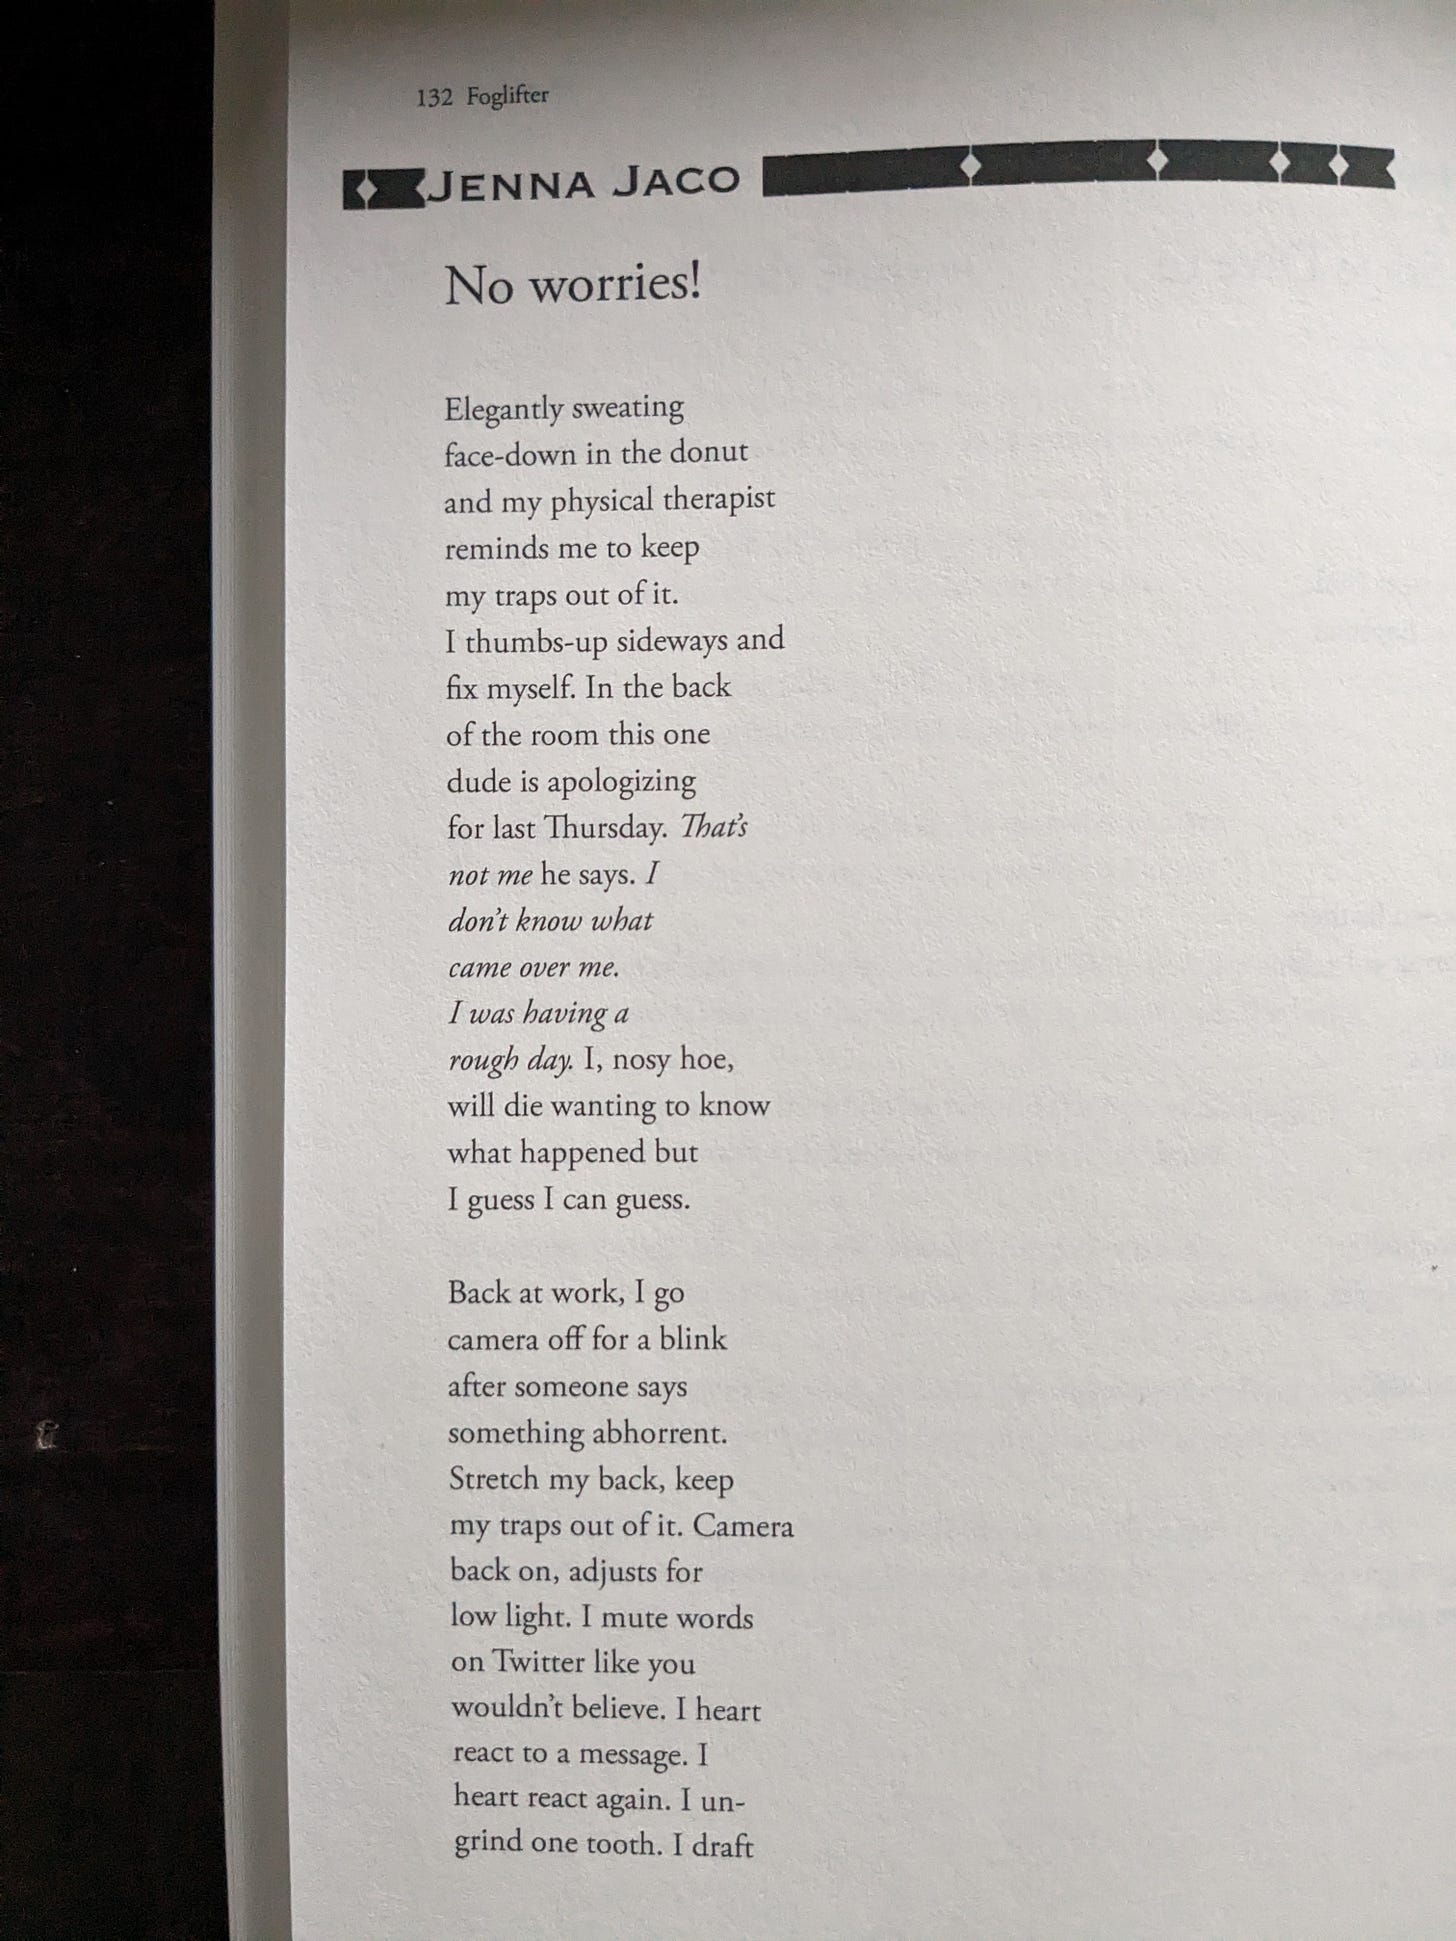 Photo of my poem "No worries!" which is too long for Substack's alt text.